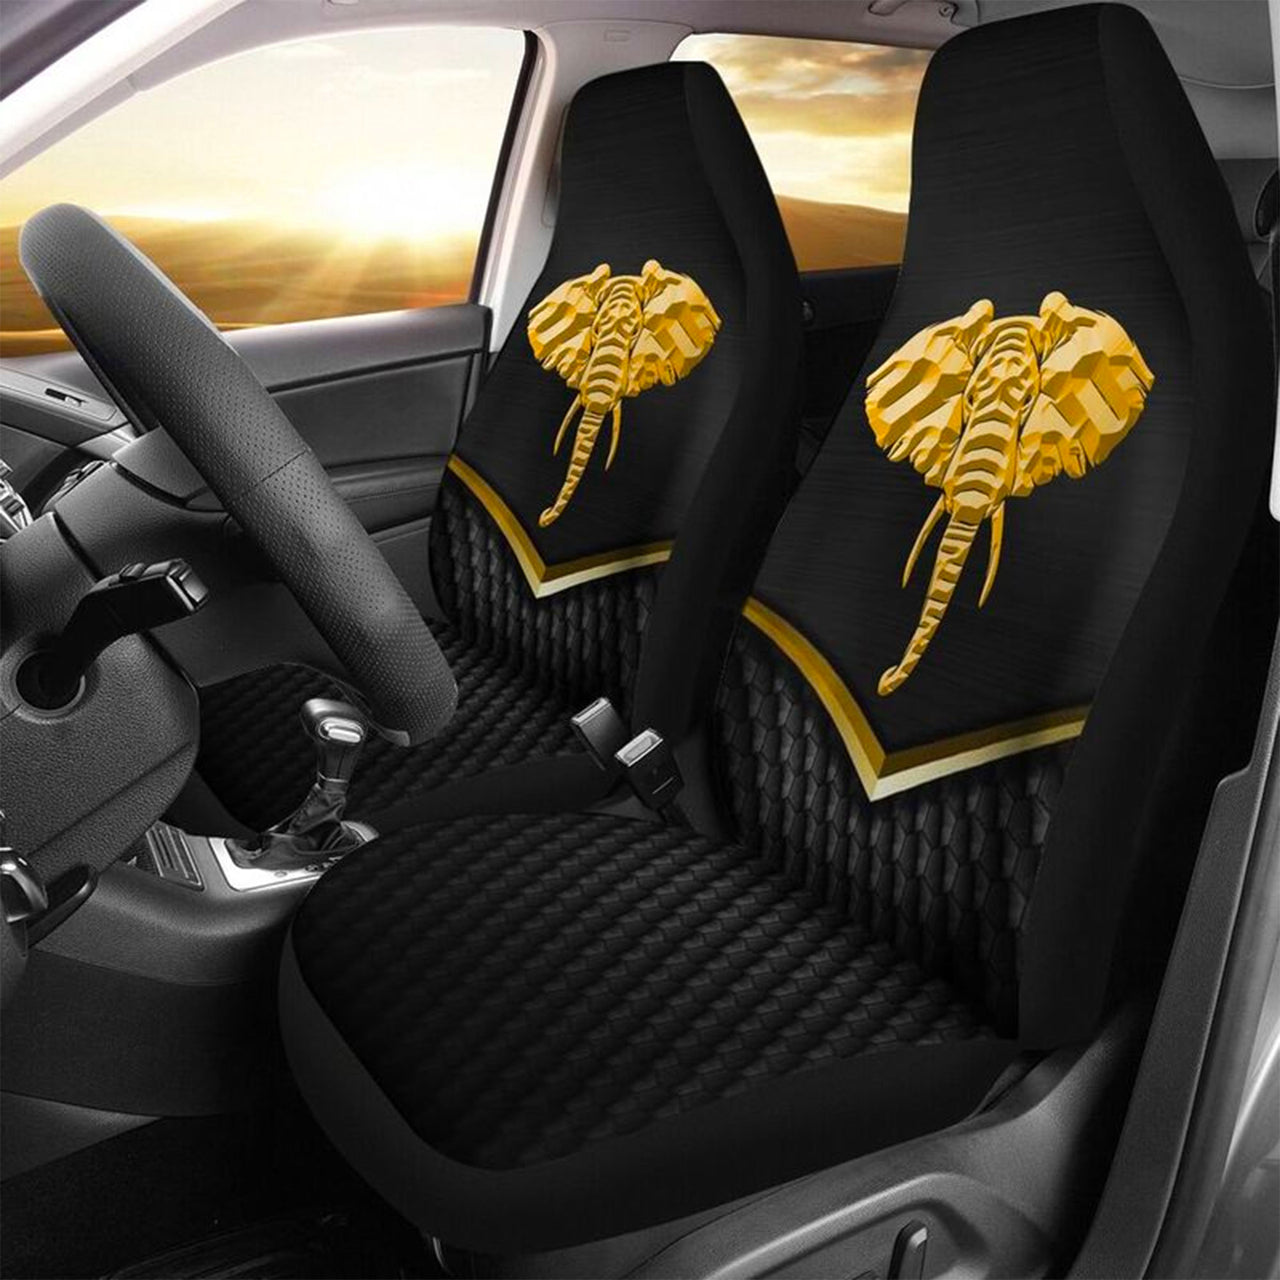 Custom Car Seat Cover Elephant Black Gold Seat Covers for Cars